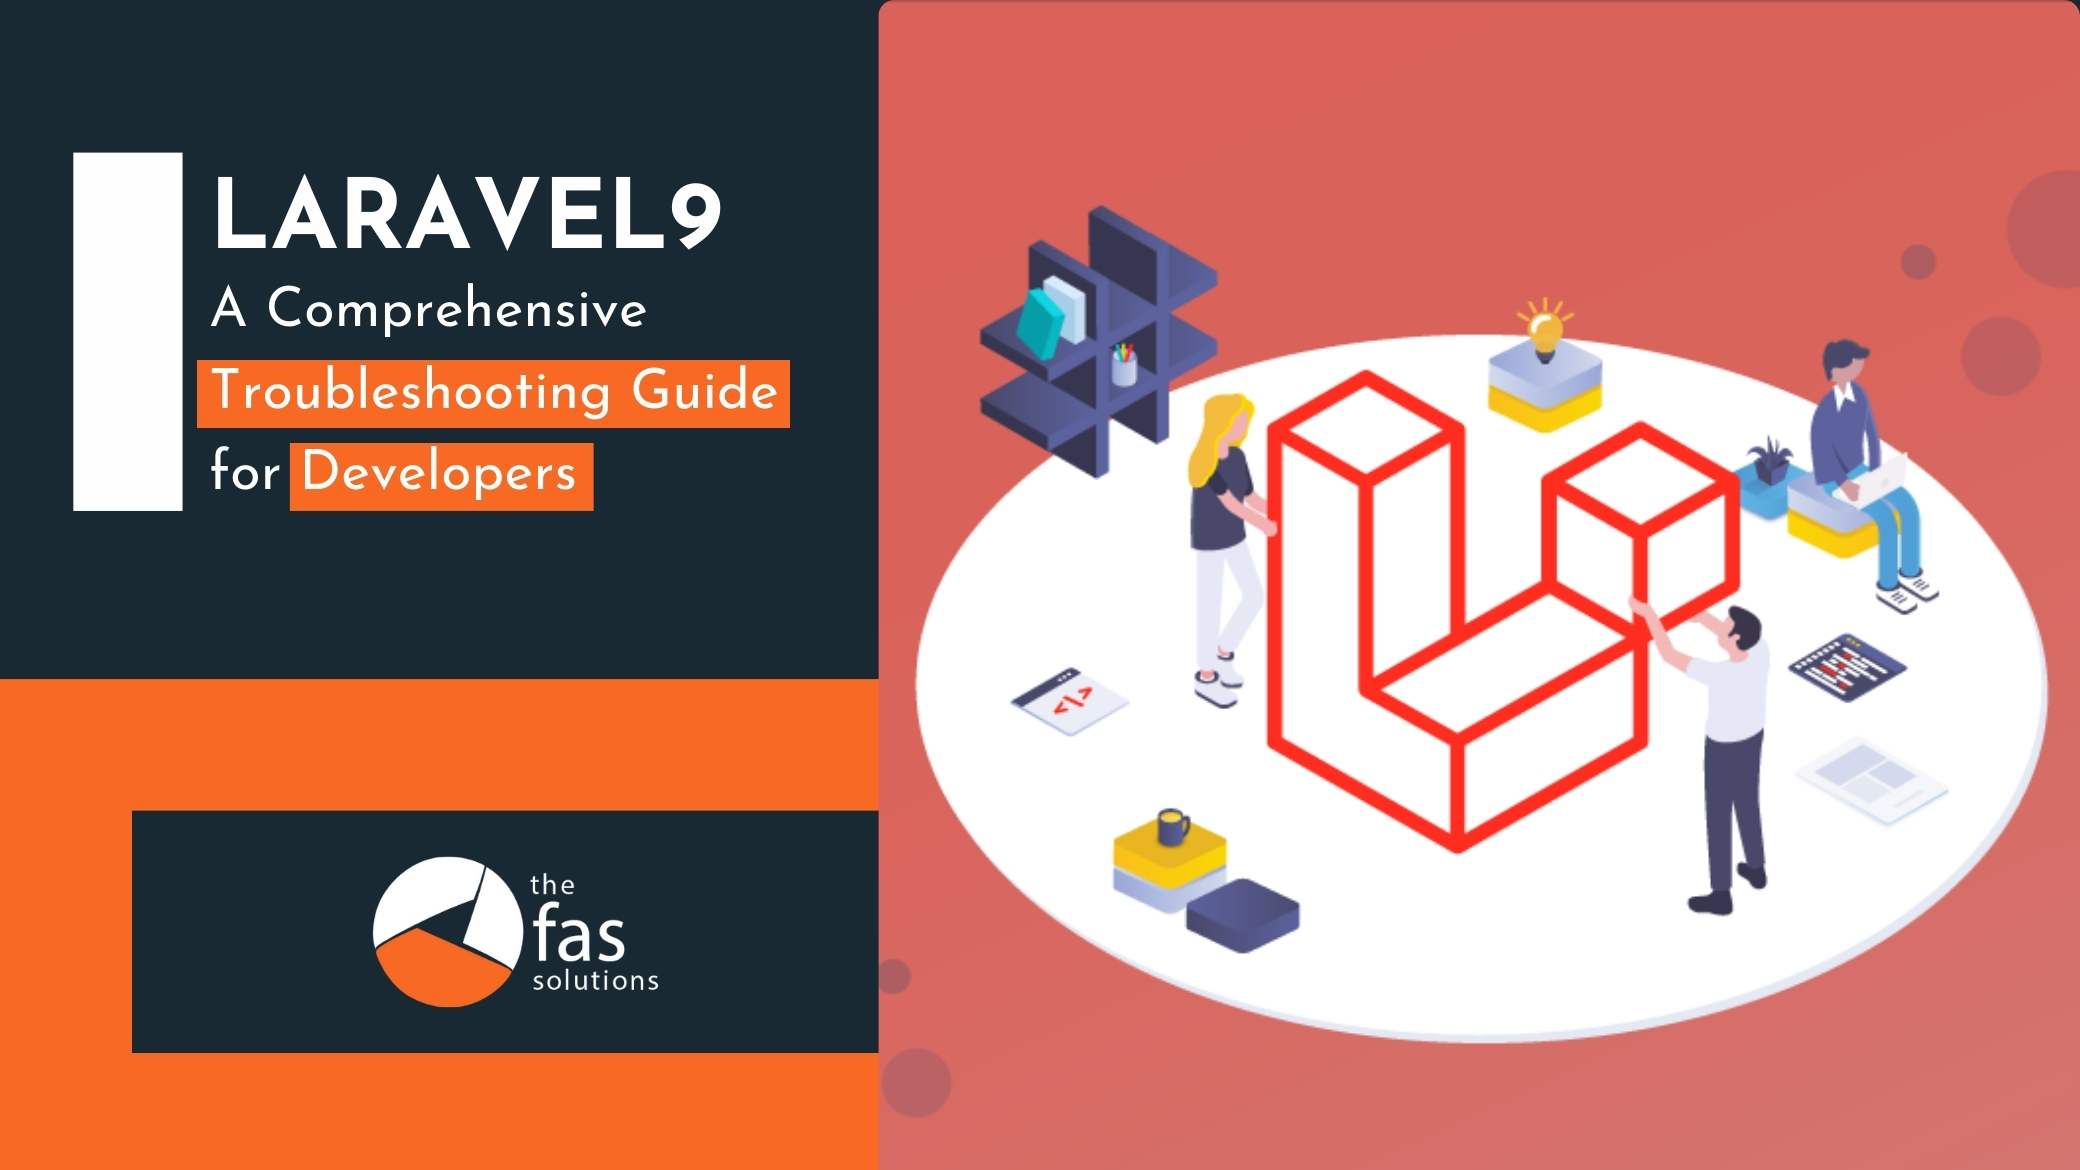 Laravel 9: A Comprehensive Troubleshooting Guide for Developers